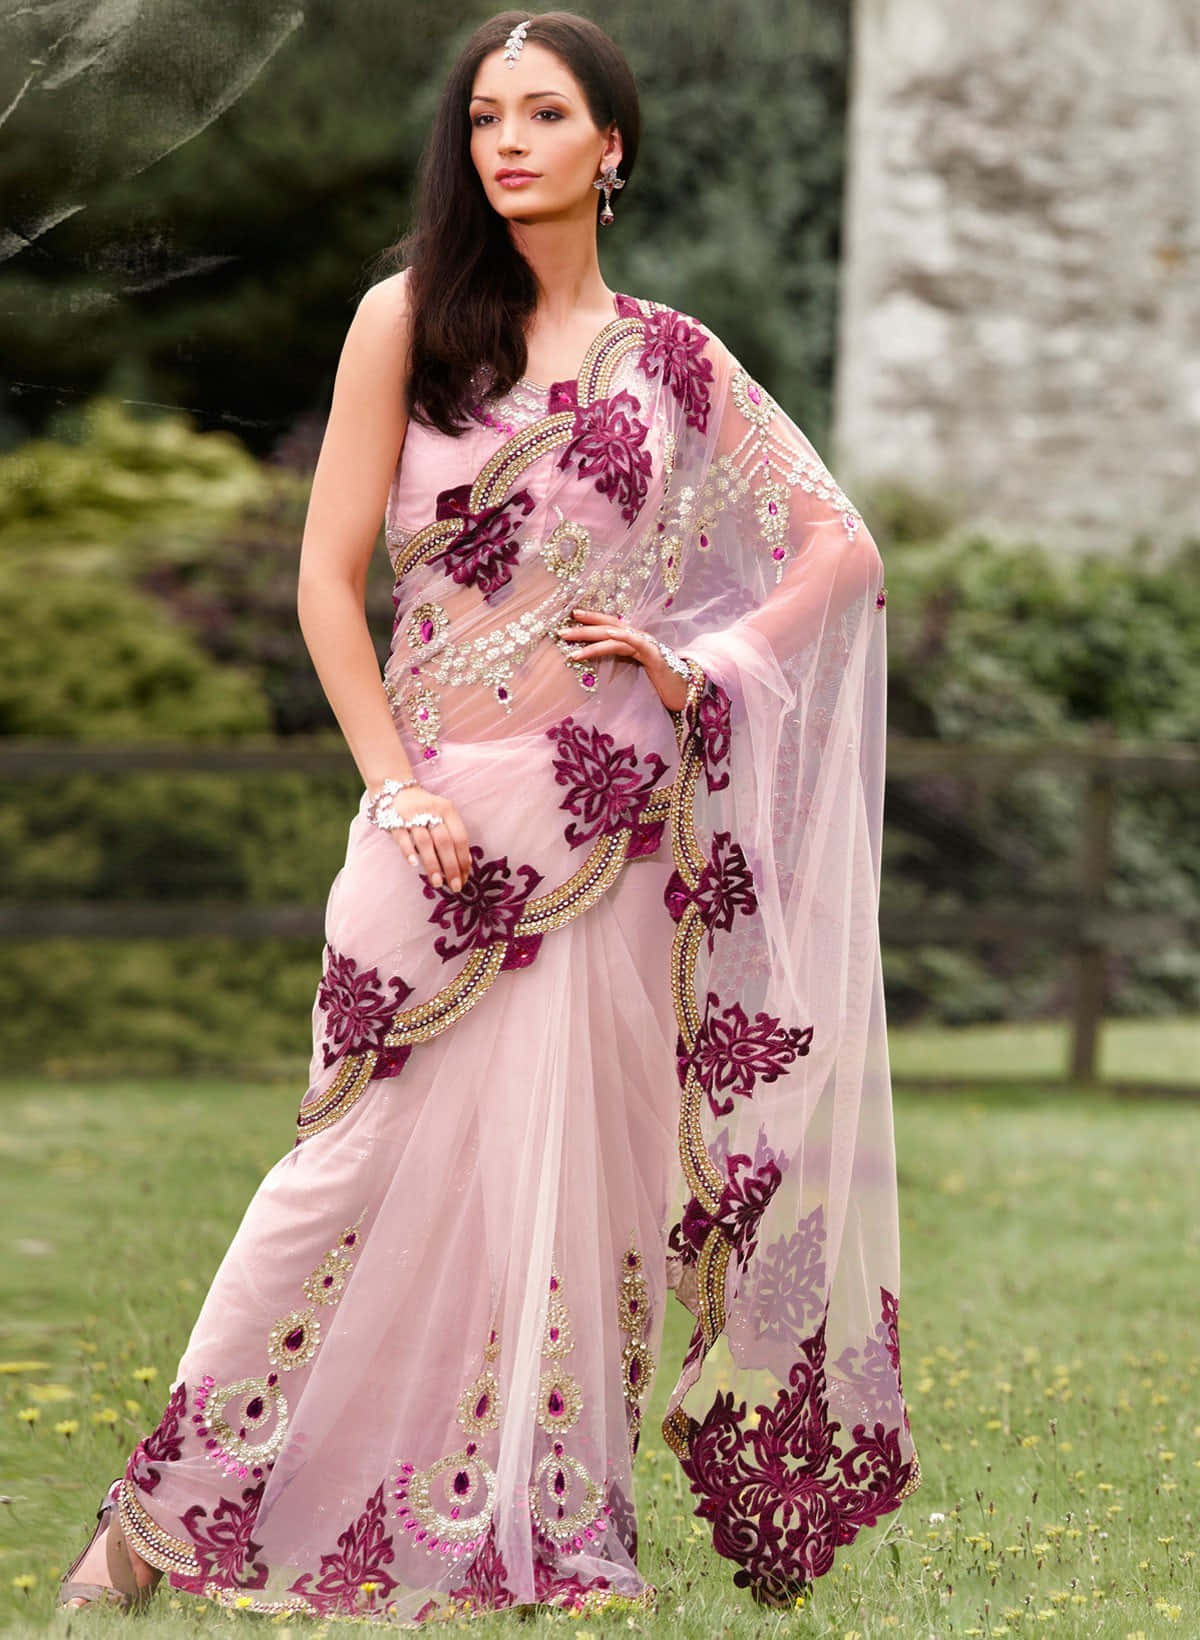 A Woman In A Pink Sari Posing In The Grass